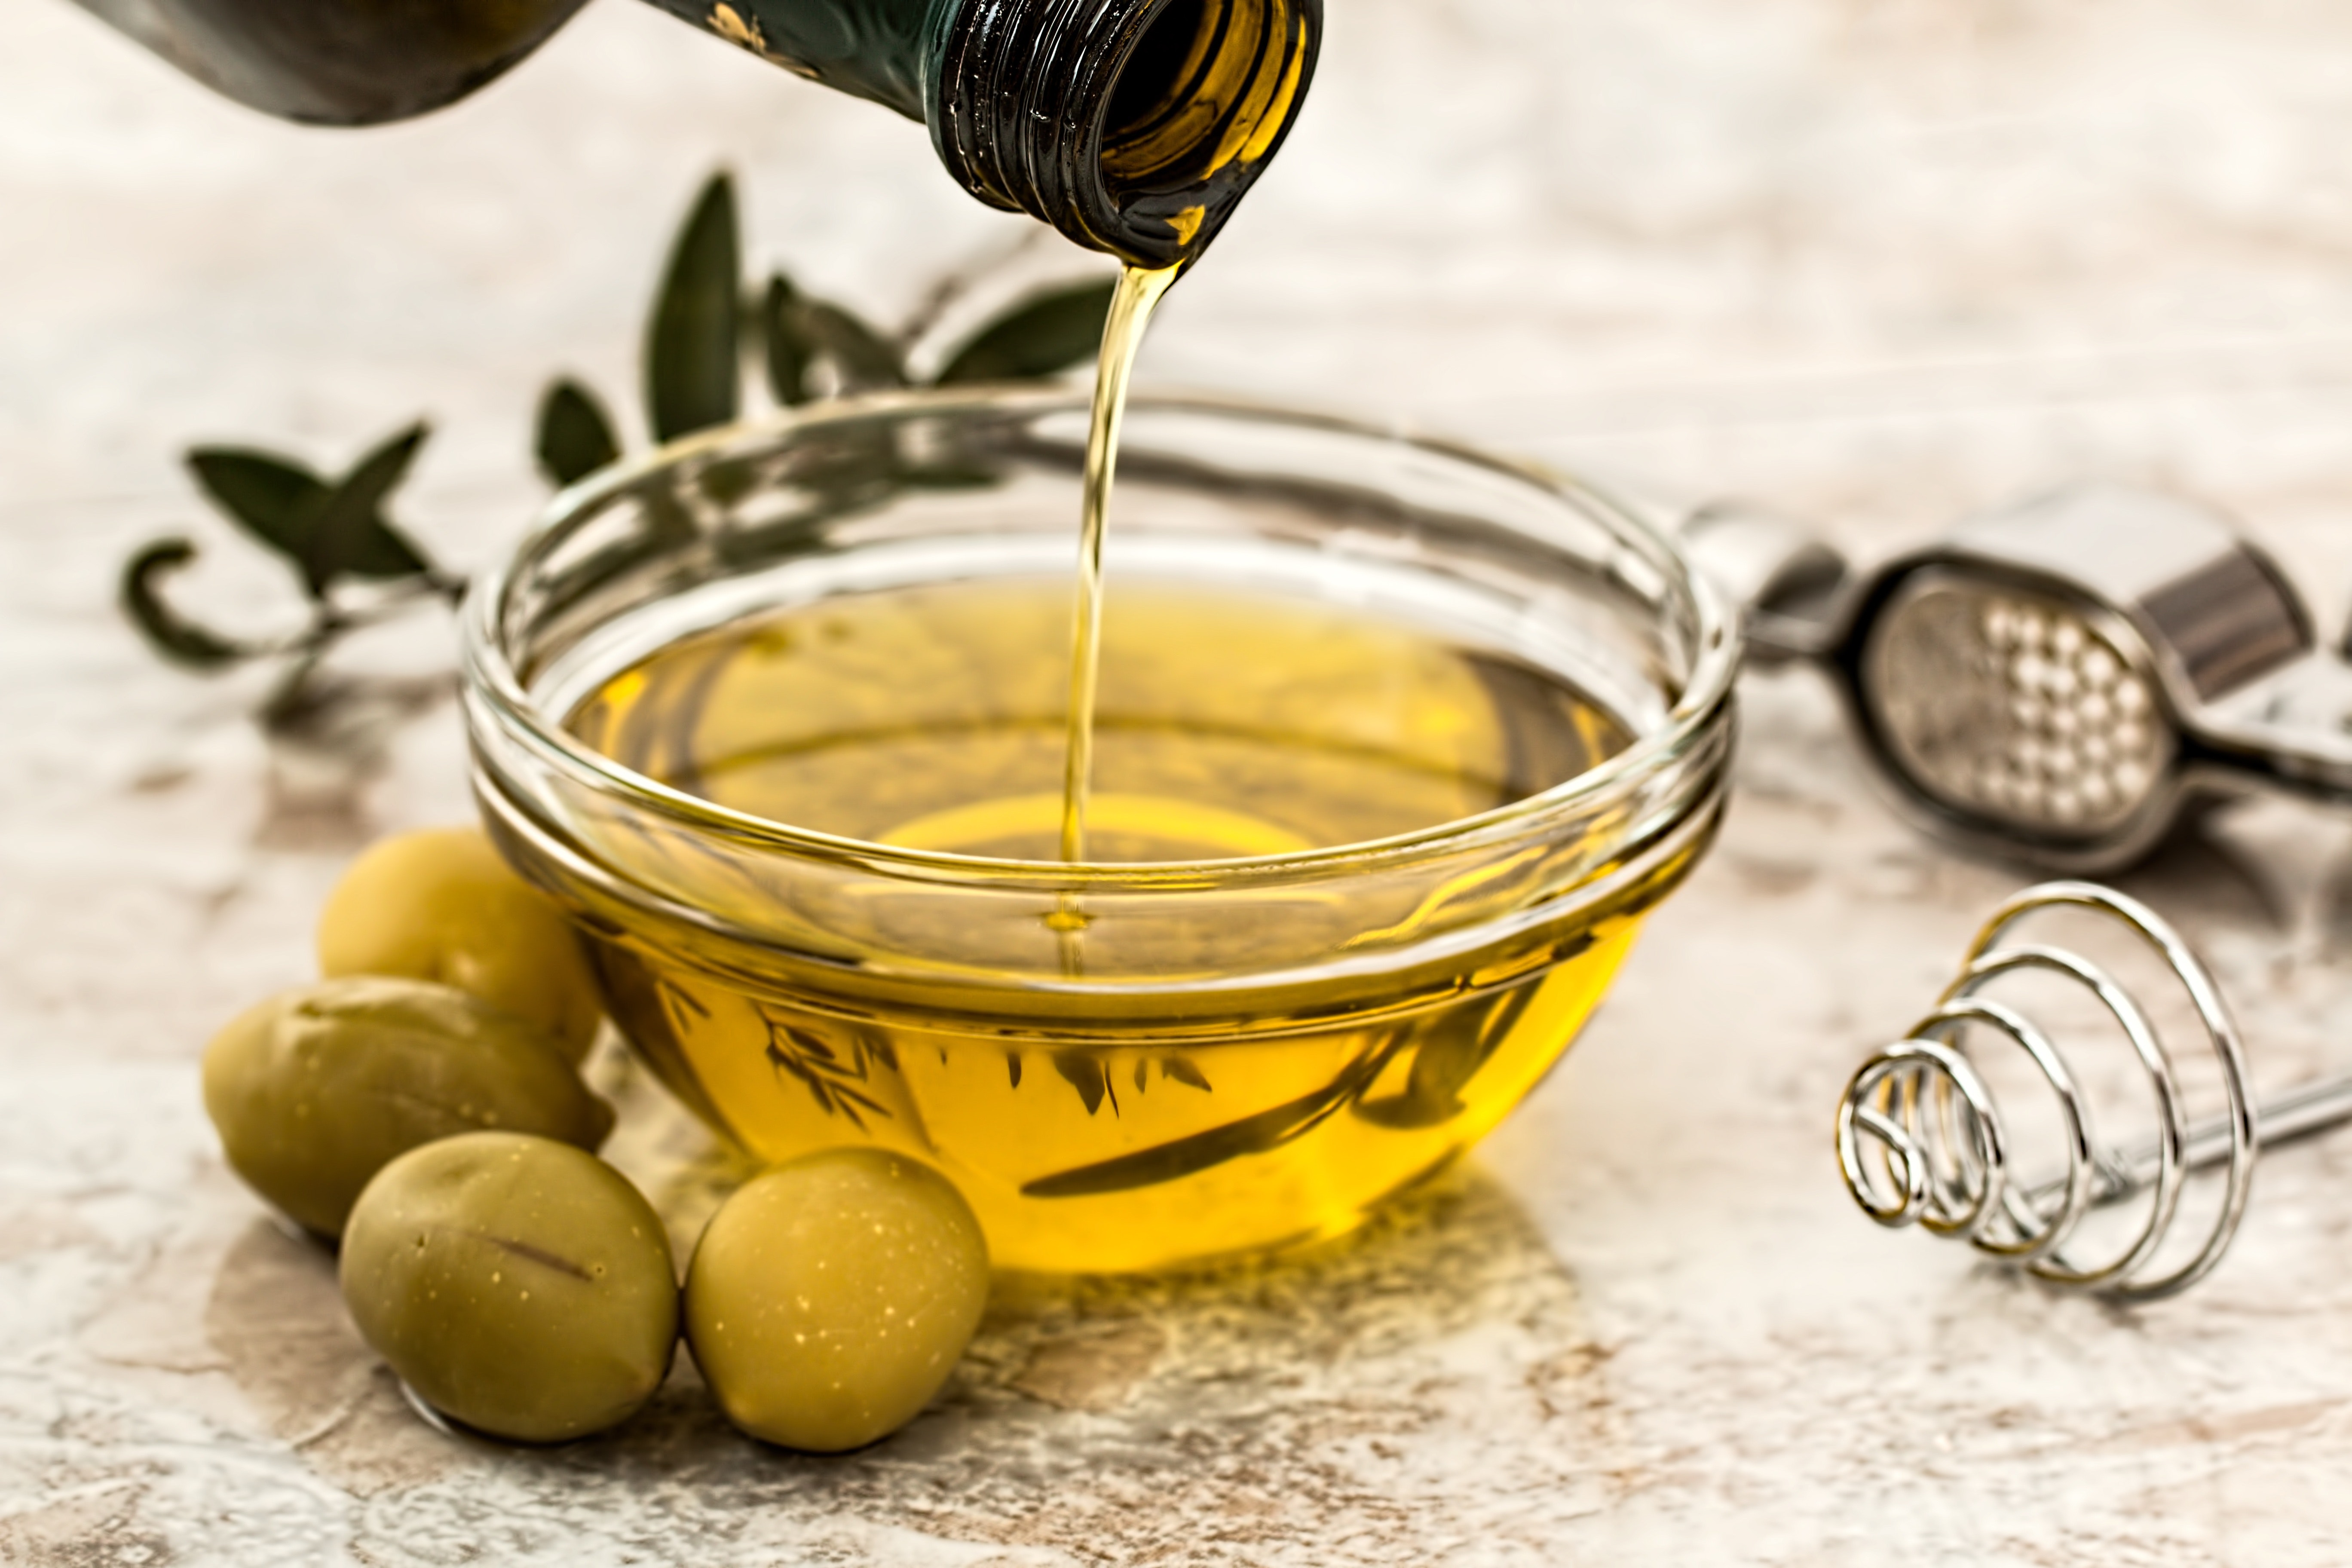 healthiest-runners-diet-for-best-performance-olive-oil